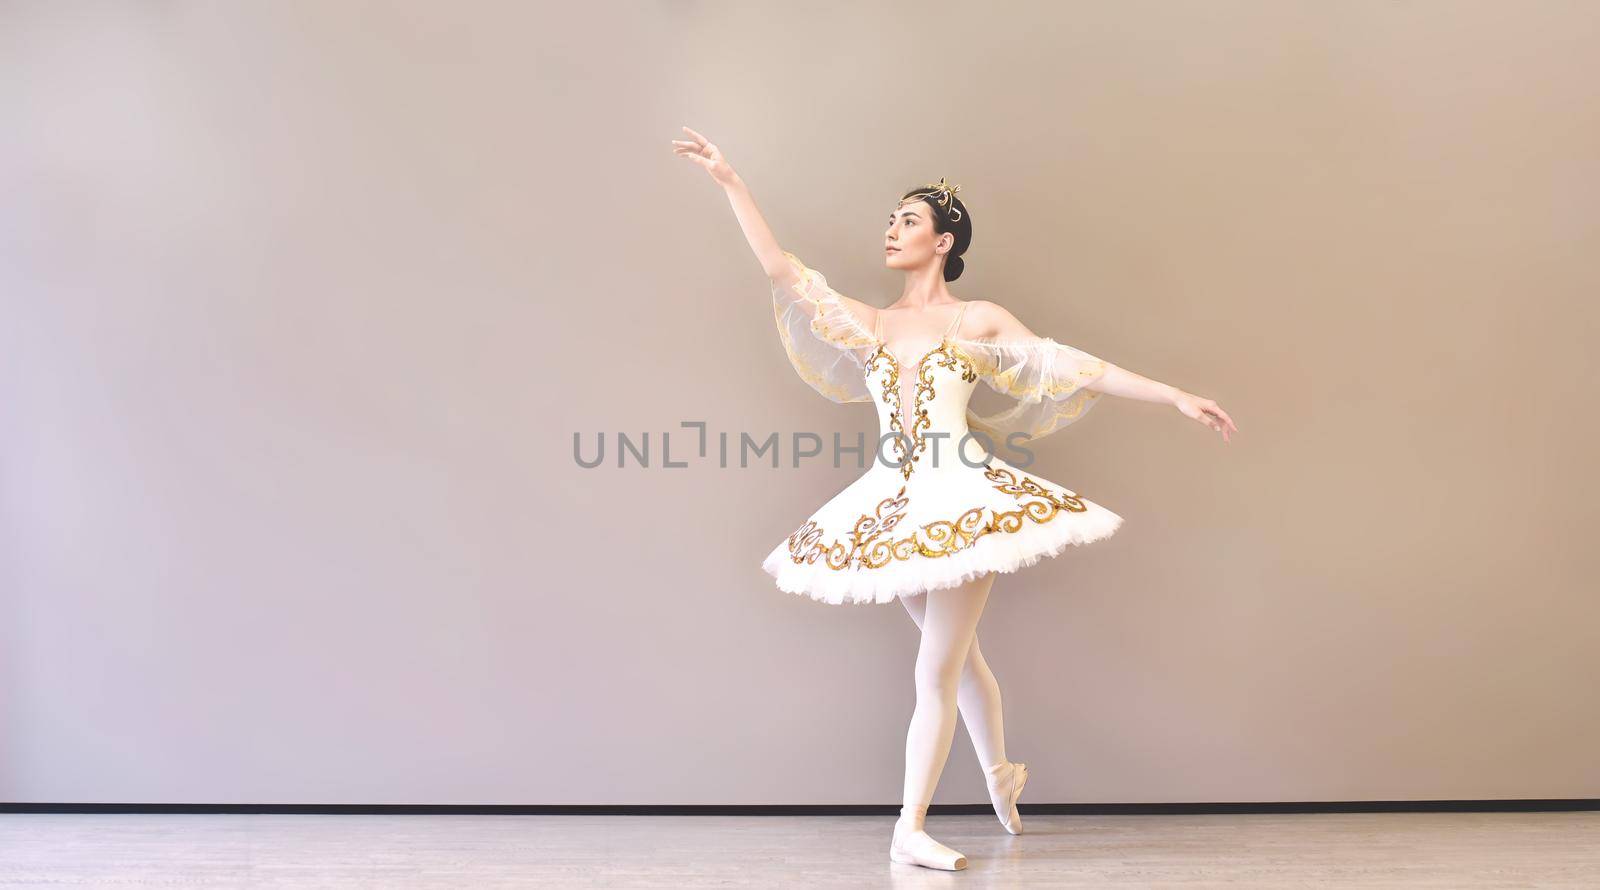 beautiful woman ballet dancer in a white tutu practicing classical dance steps in studio before performance by Nickstock